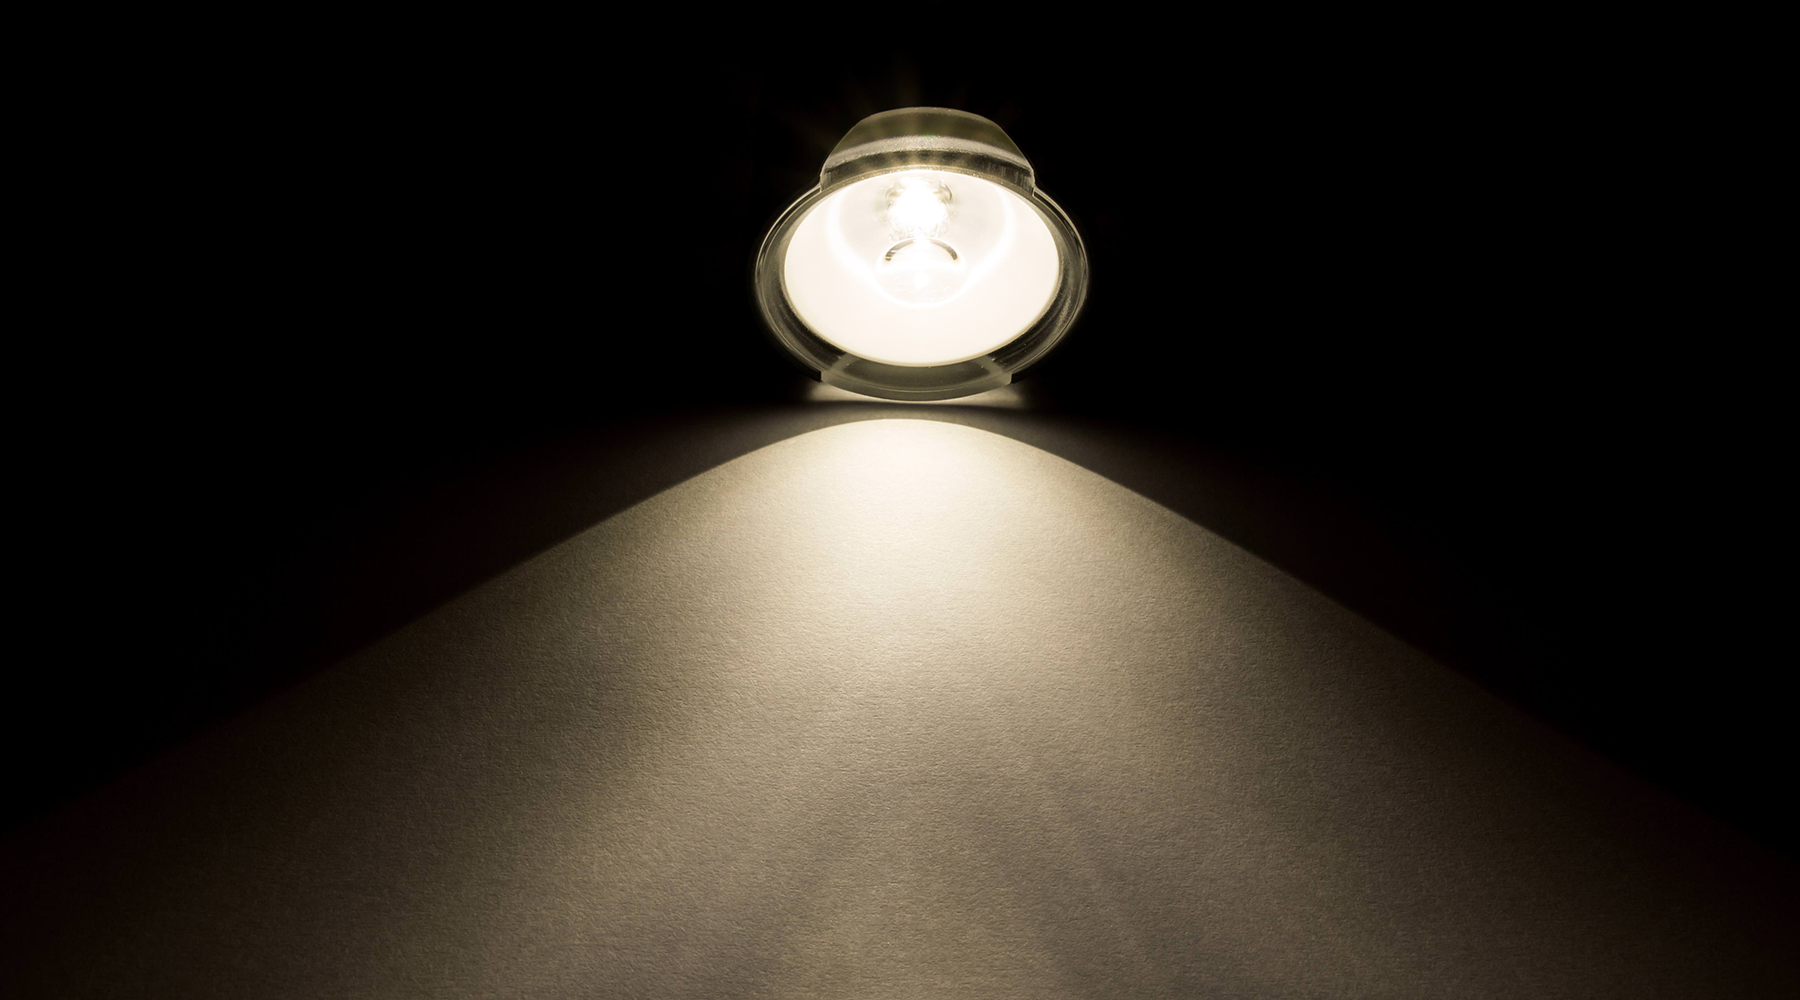 What are Lumens? Why do they matter?